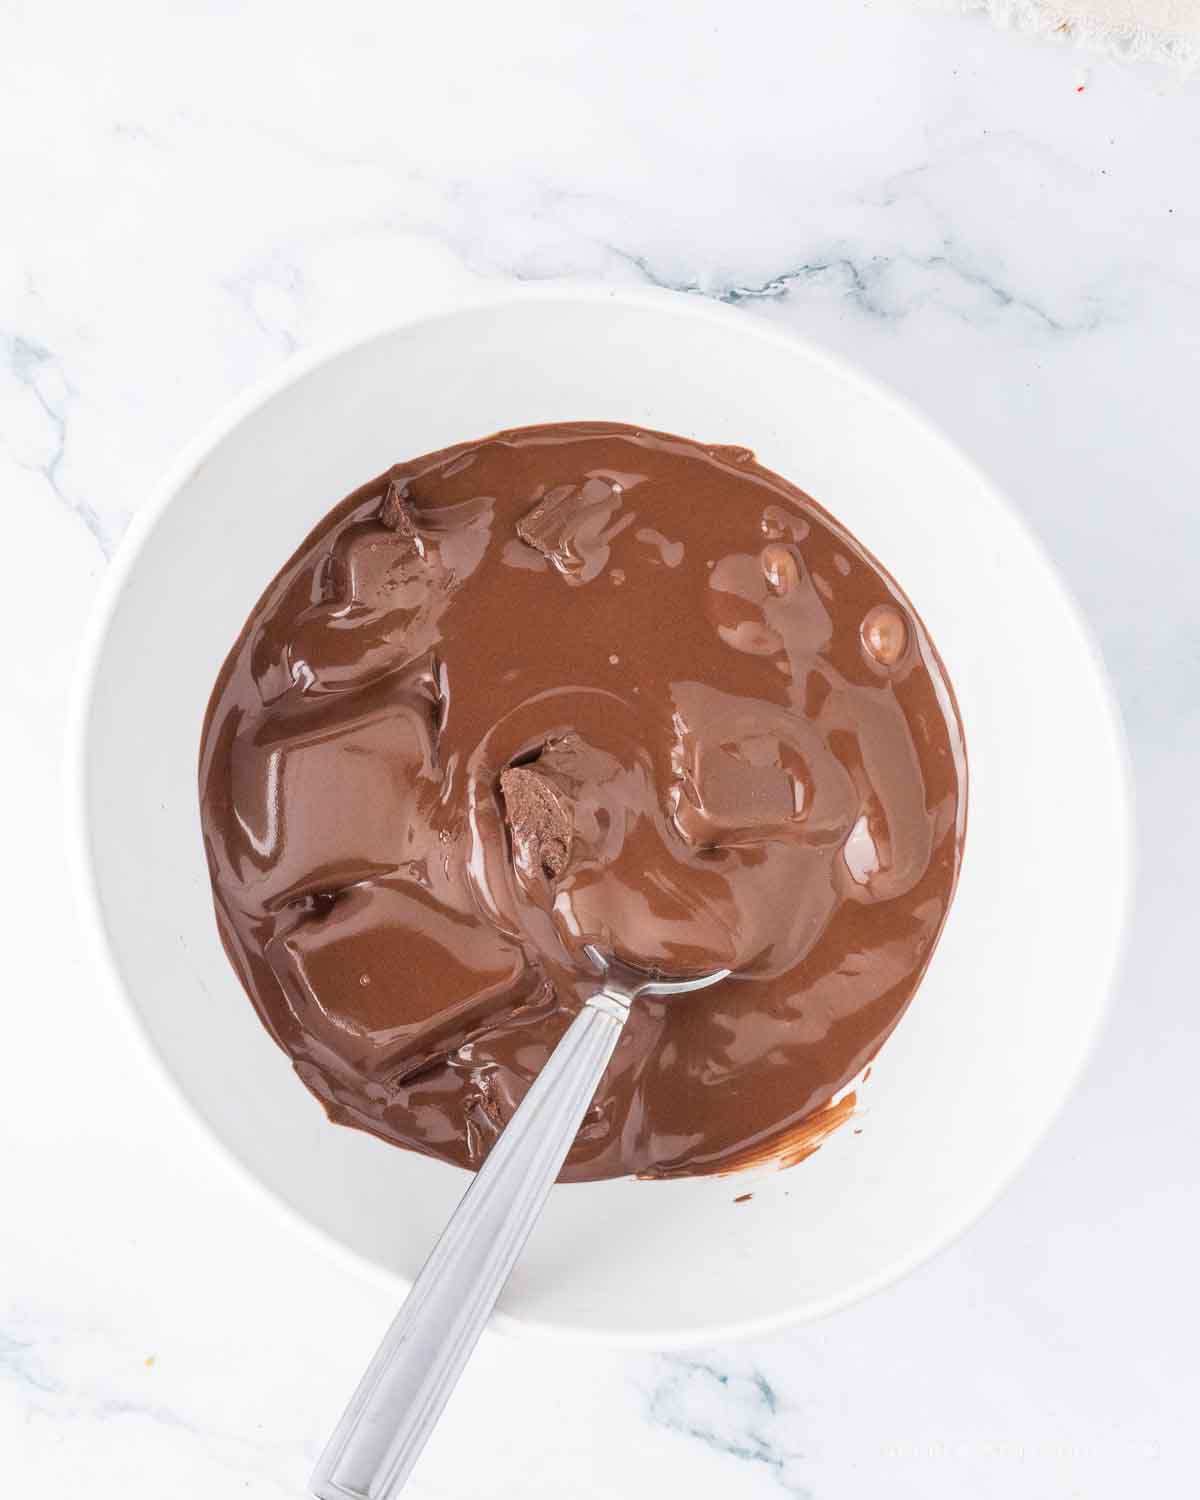 Softened melting chocolate in a bowl.